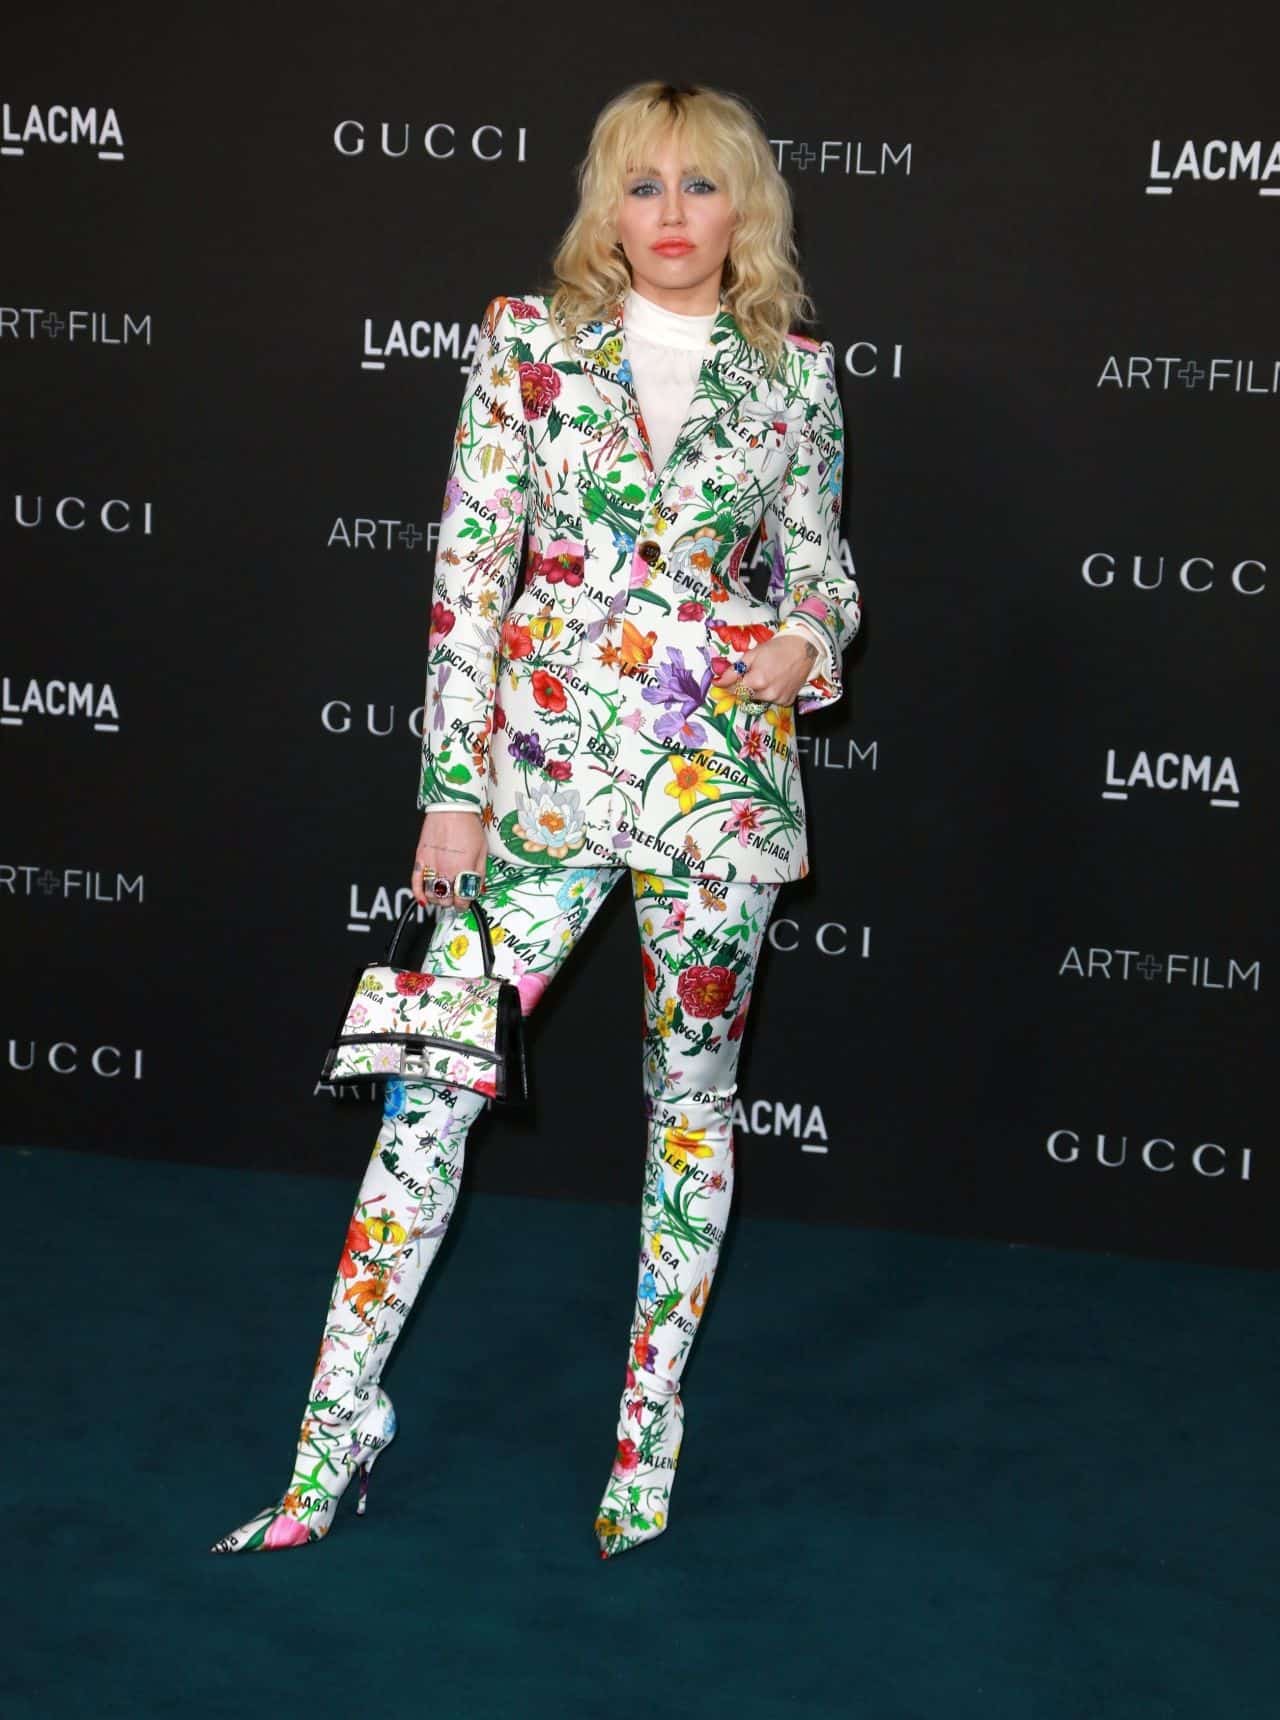 Miley Cyrus in a Tight-fitting Suit at the 2021 LACMA Art + Film Gala in LA